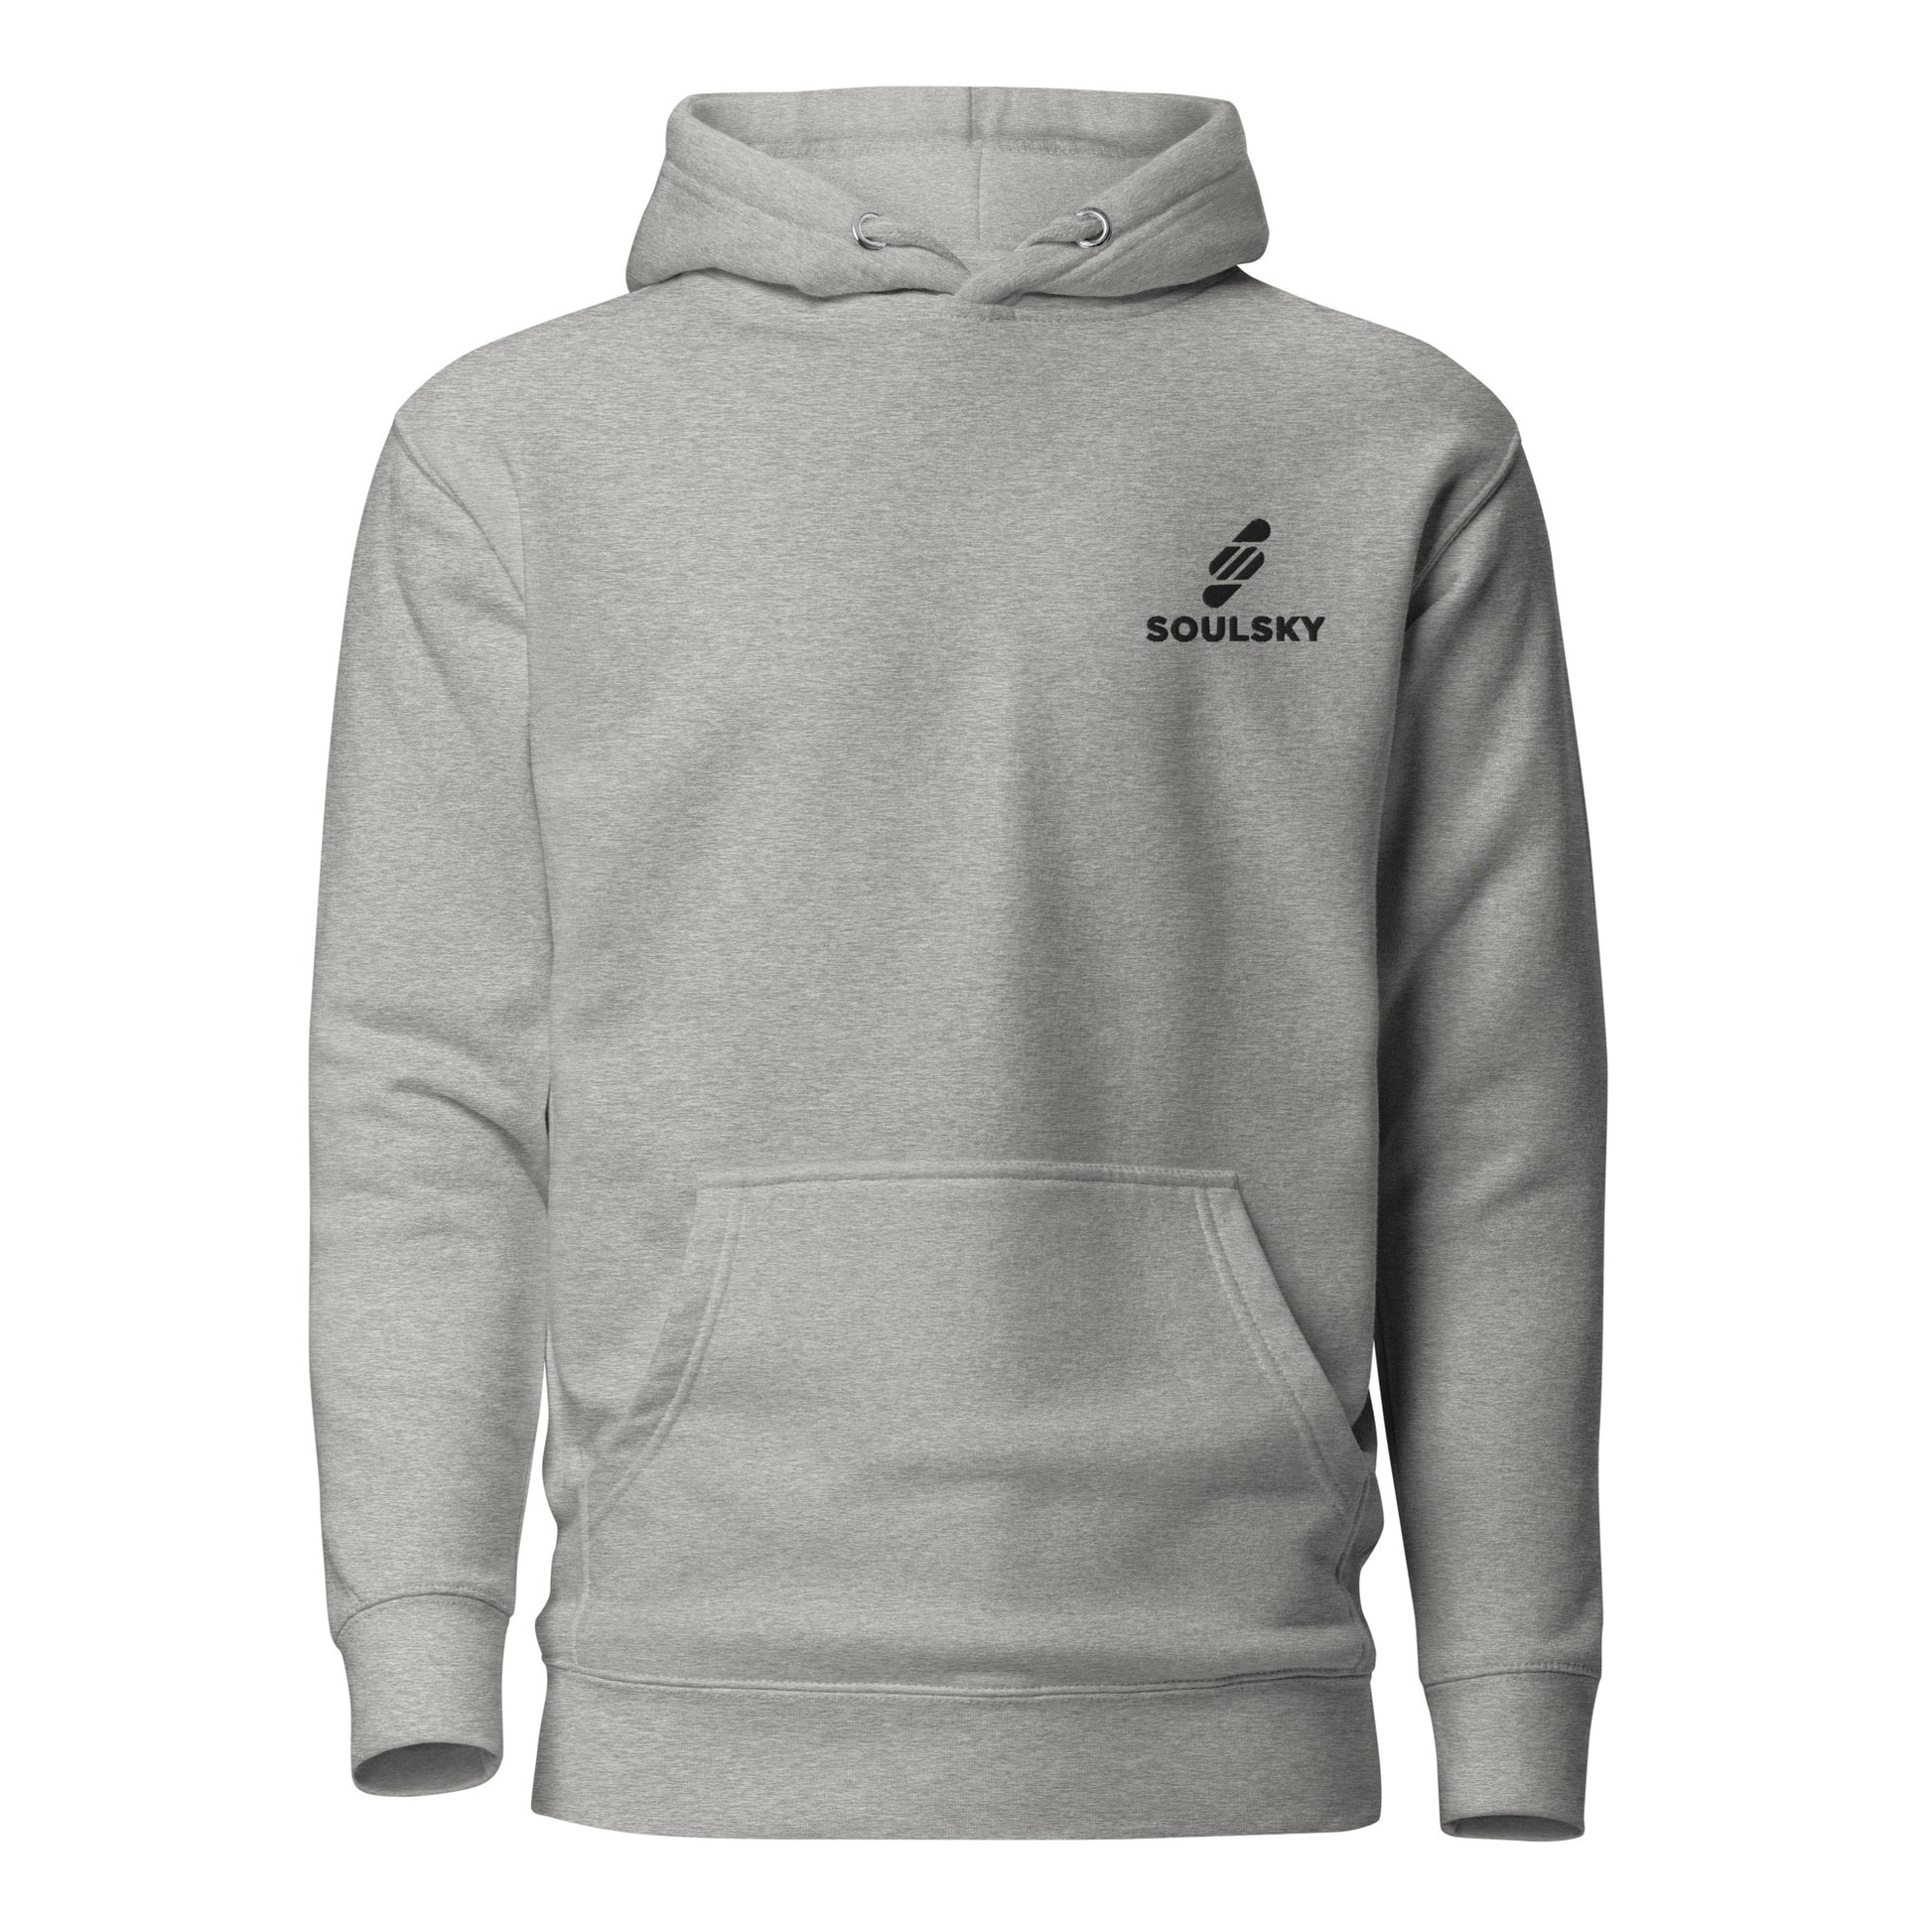 Light gray hoodie with black embroidered logo on the upper left side that says 'SOULSKY'.